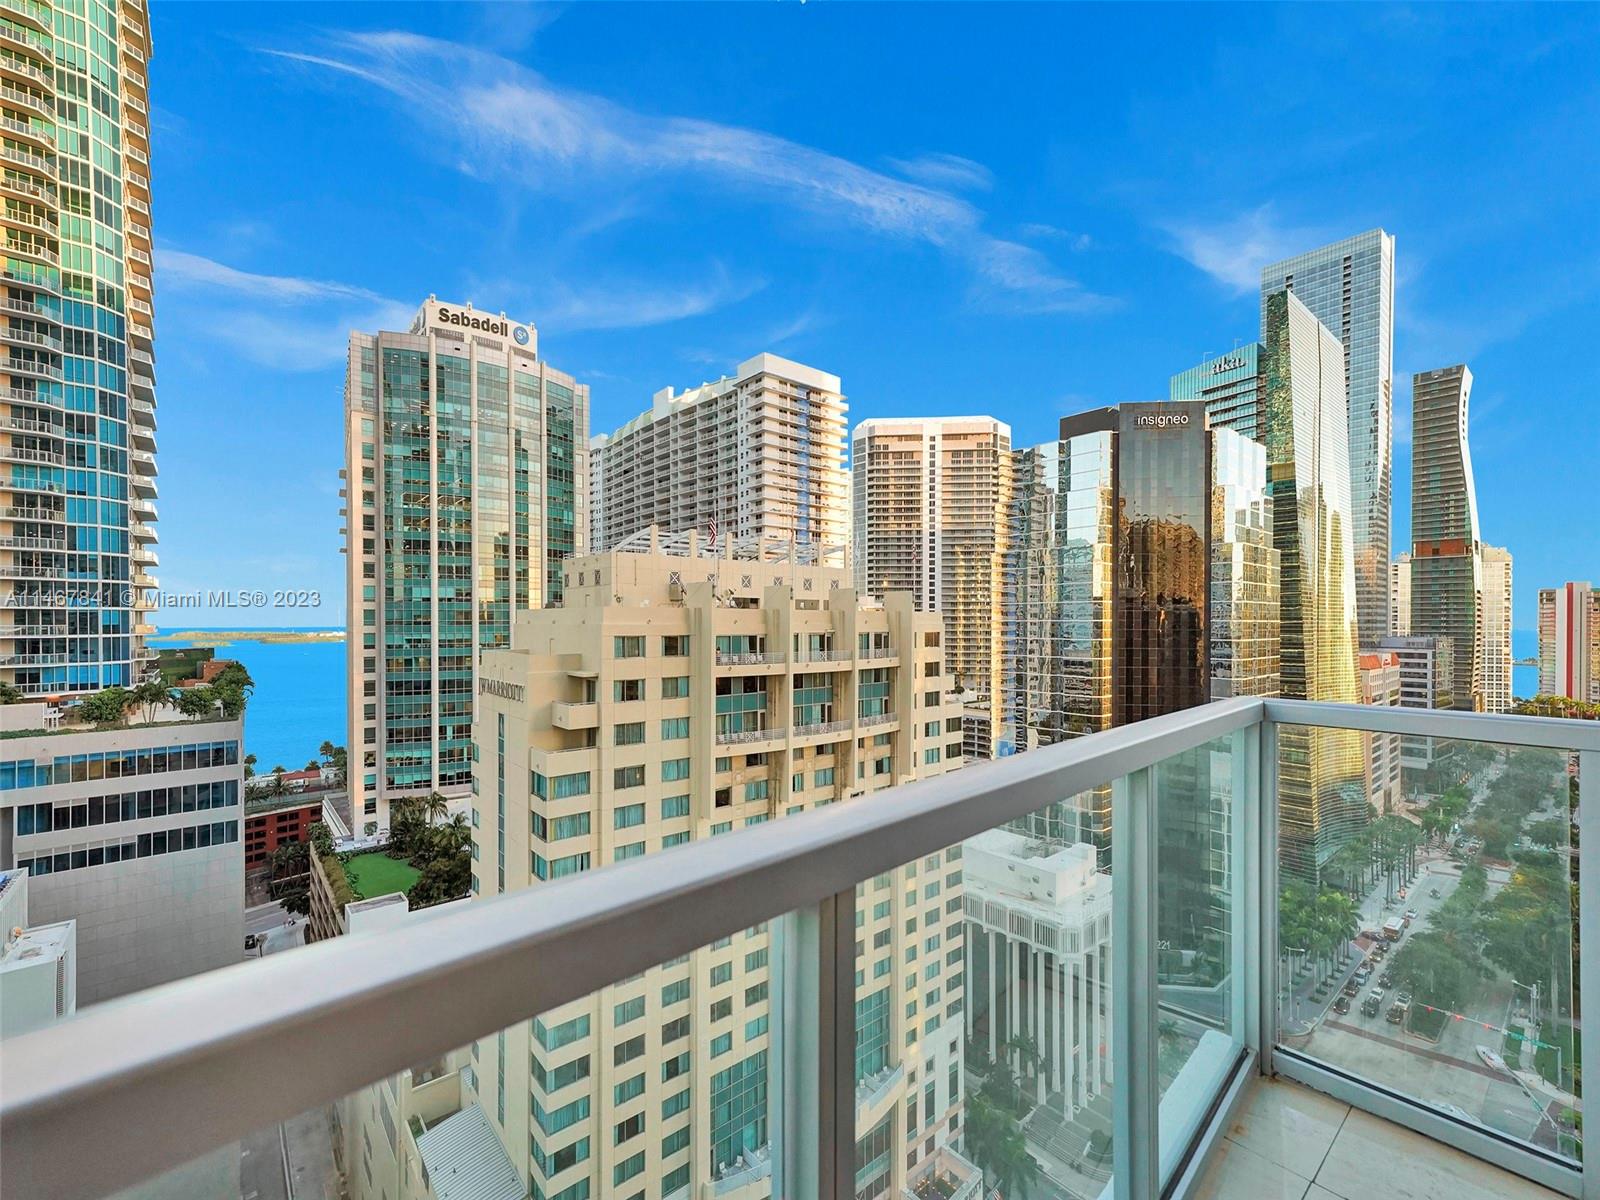 VERY ATTRACTIVE CORNER UNIT WITH GREAT VIEWS OF EAST AND SOUTH BRICKELL AND THE BAY. UNIT IN GREAT CONDITION. FULL AMENITIES BUILDING WITH A UNIQUE URBAN STYLE, WHICH INCLUDES POOL/SPA, MASSAGE, GYM, AEROBICS, YOGA AND ENTERTAINMENT ROOMS. ALSO, THERE'S V VIRTUAL GOLF, WINE, AND CIGAR ROOM. 24HR VALET AND CONCIERGE SERVICE ARE ALSO INCLUDED. UNIT IN A DESIRABLE LOCATION, BRICKELL, AND FINISHED WITH WHITE MARBLE FLOORS AND STAINLESS STEEL APPLIANCES. For Showings, please call Brandon Harnick co-listing broker